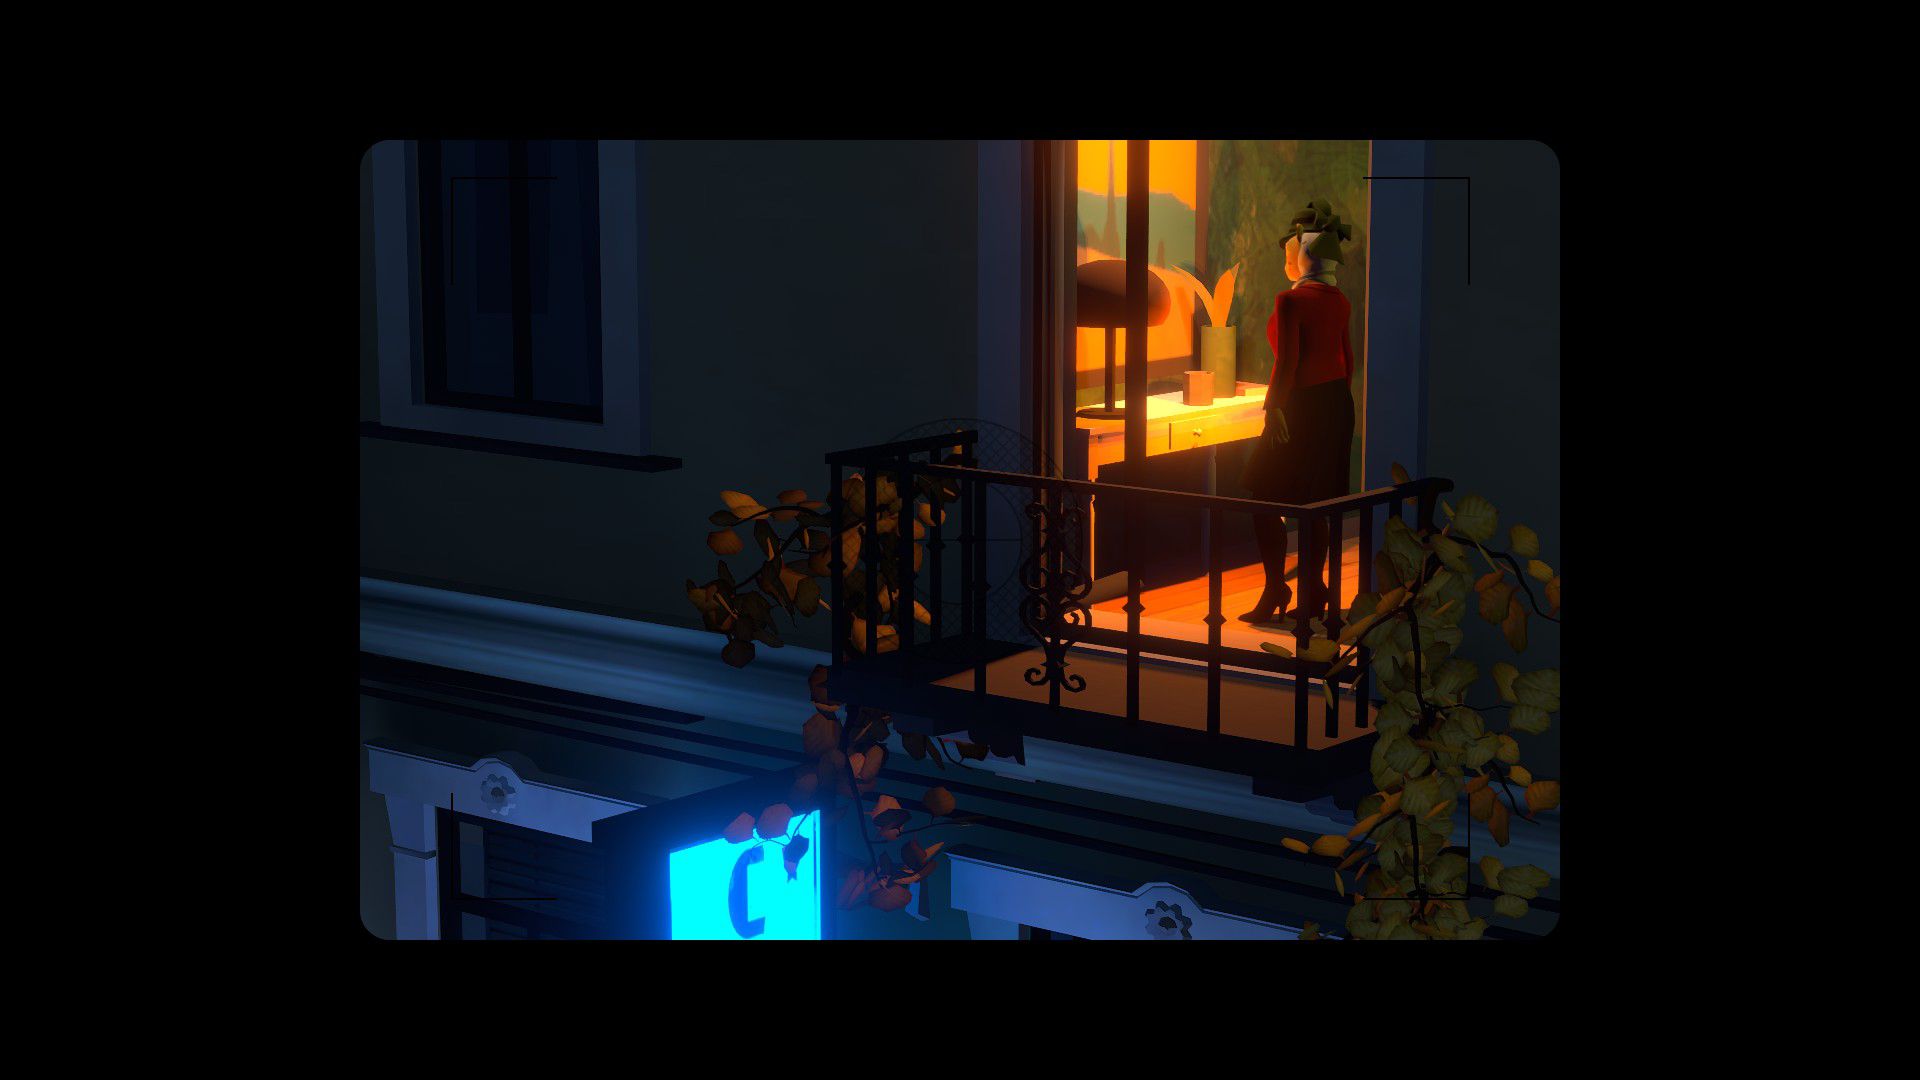 Screenshot from The Flower Collectors. A first person perspective view of a balcony. A woman stands further in the background of a warmly lit room. A black vignette frames the scene. 